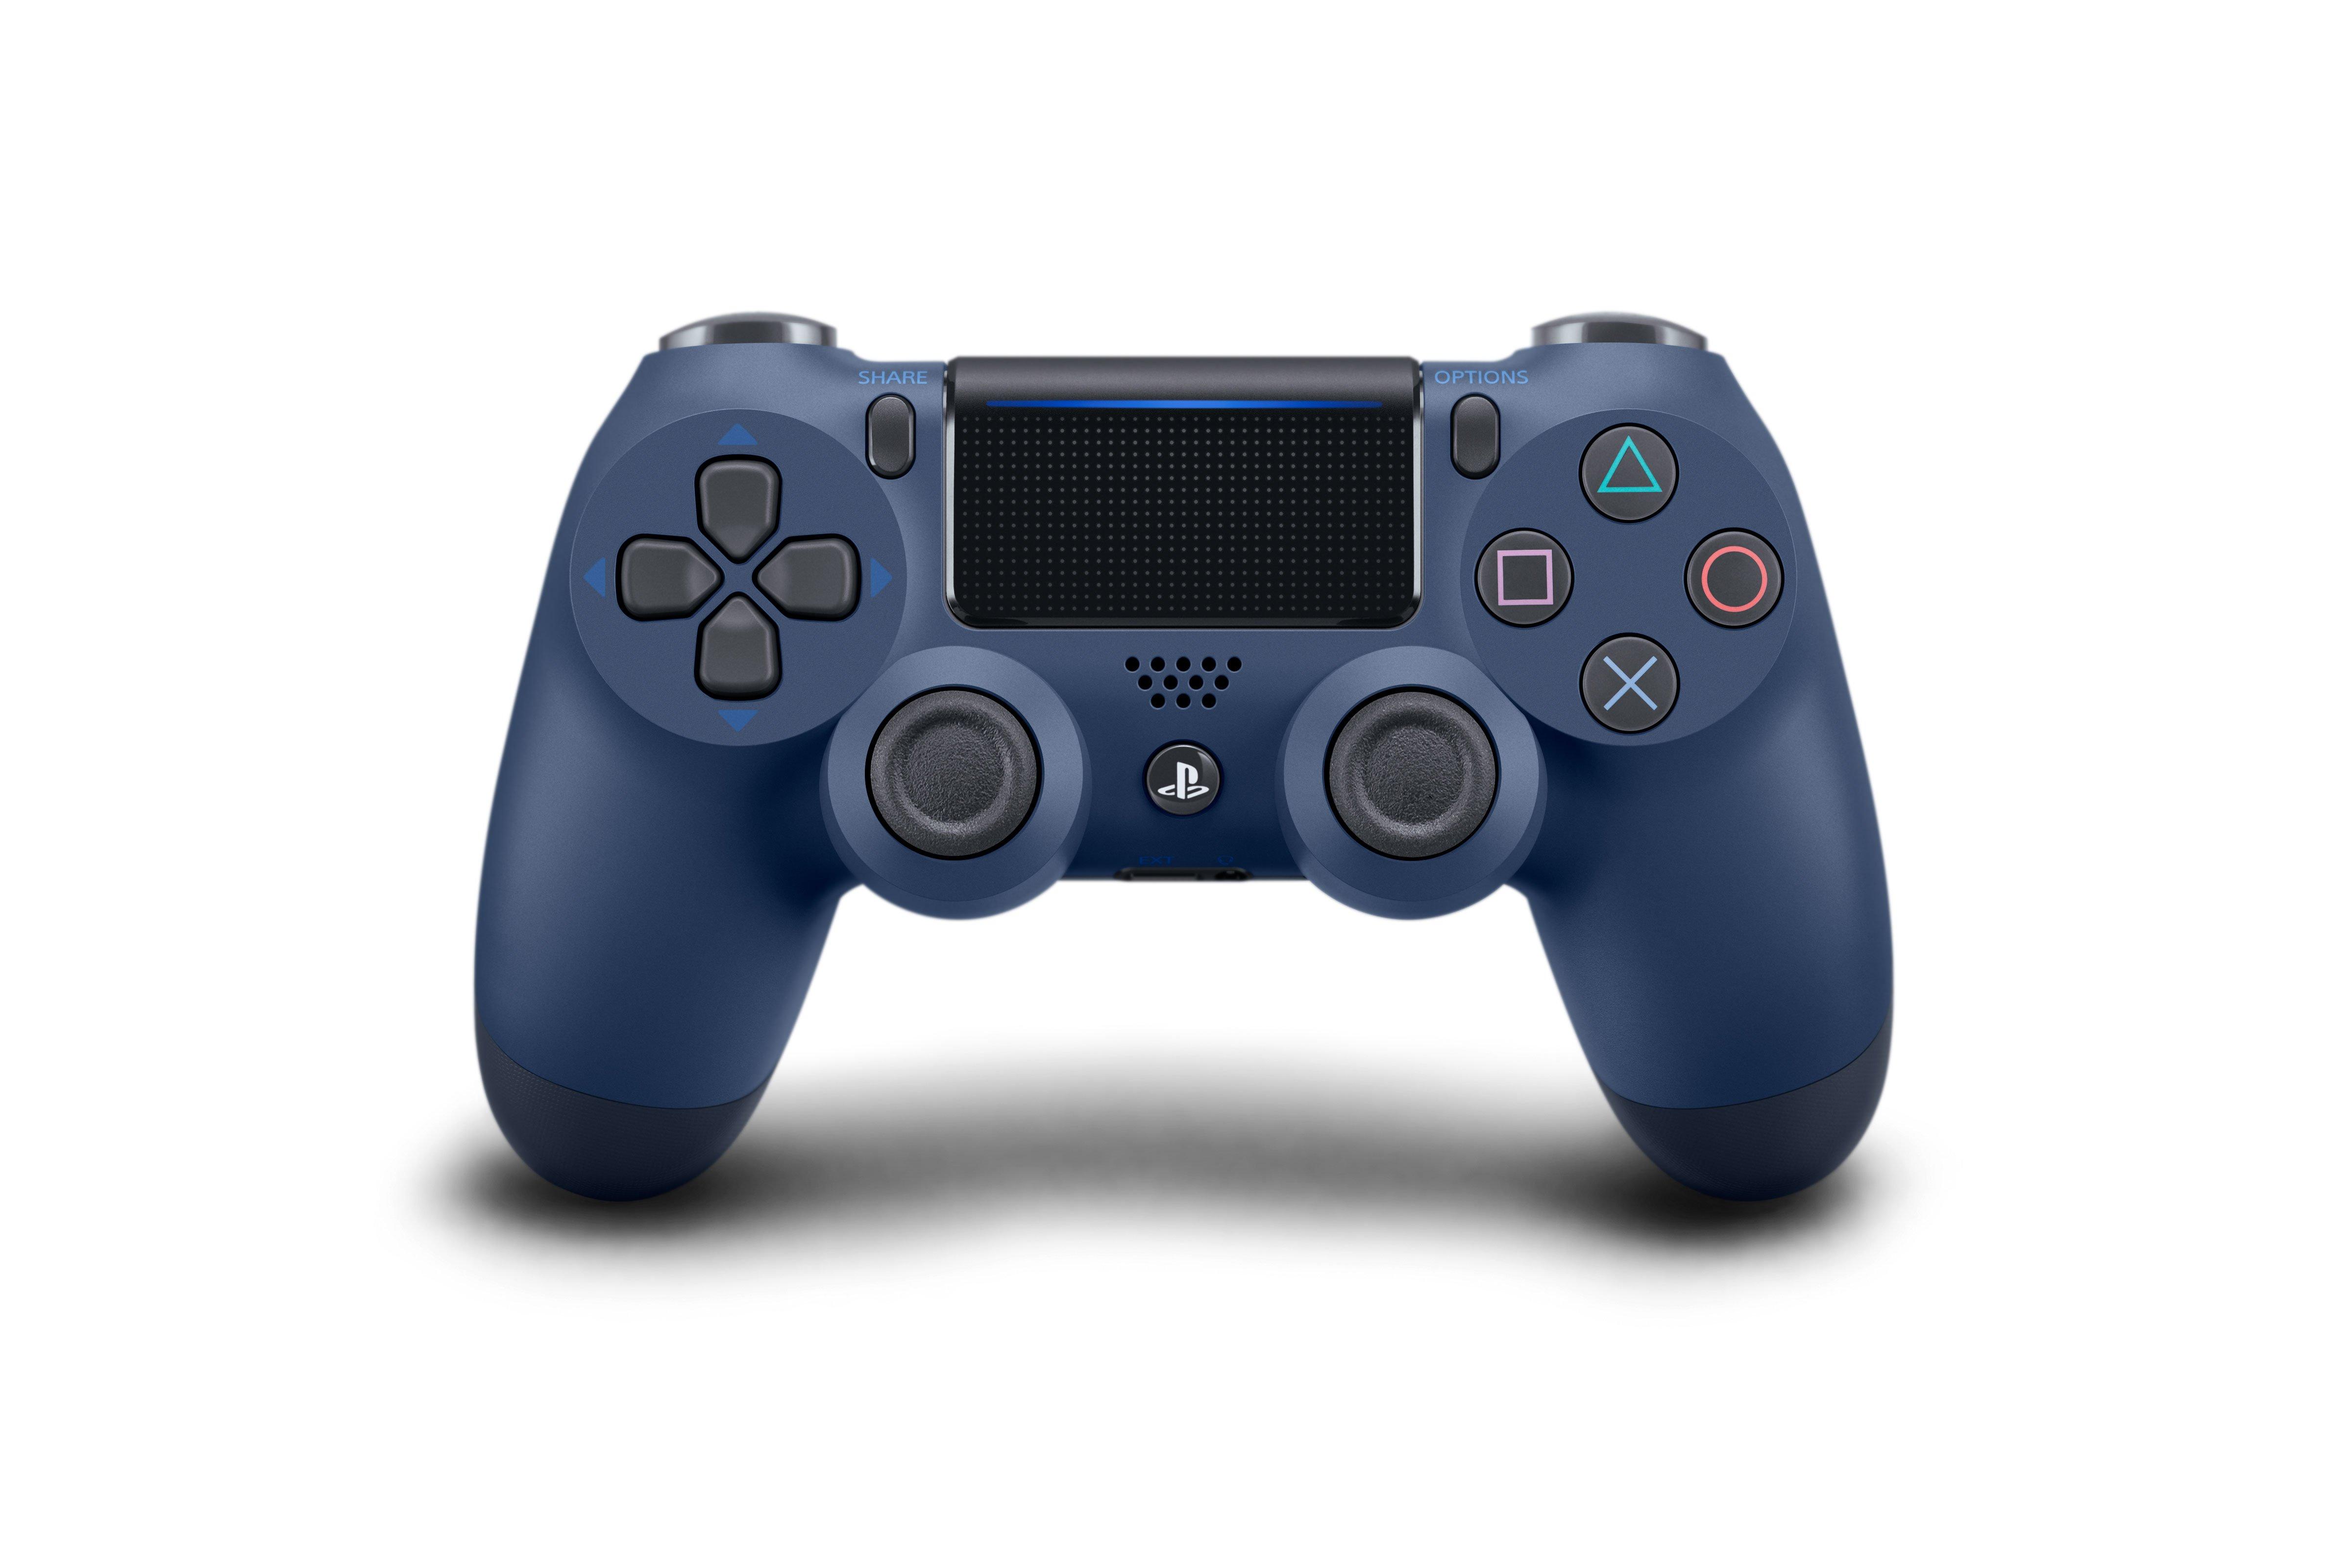 ps4 controller camouflage blue